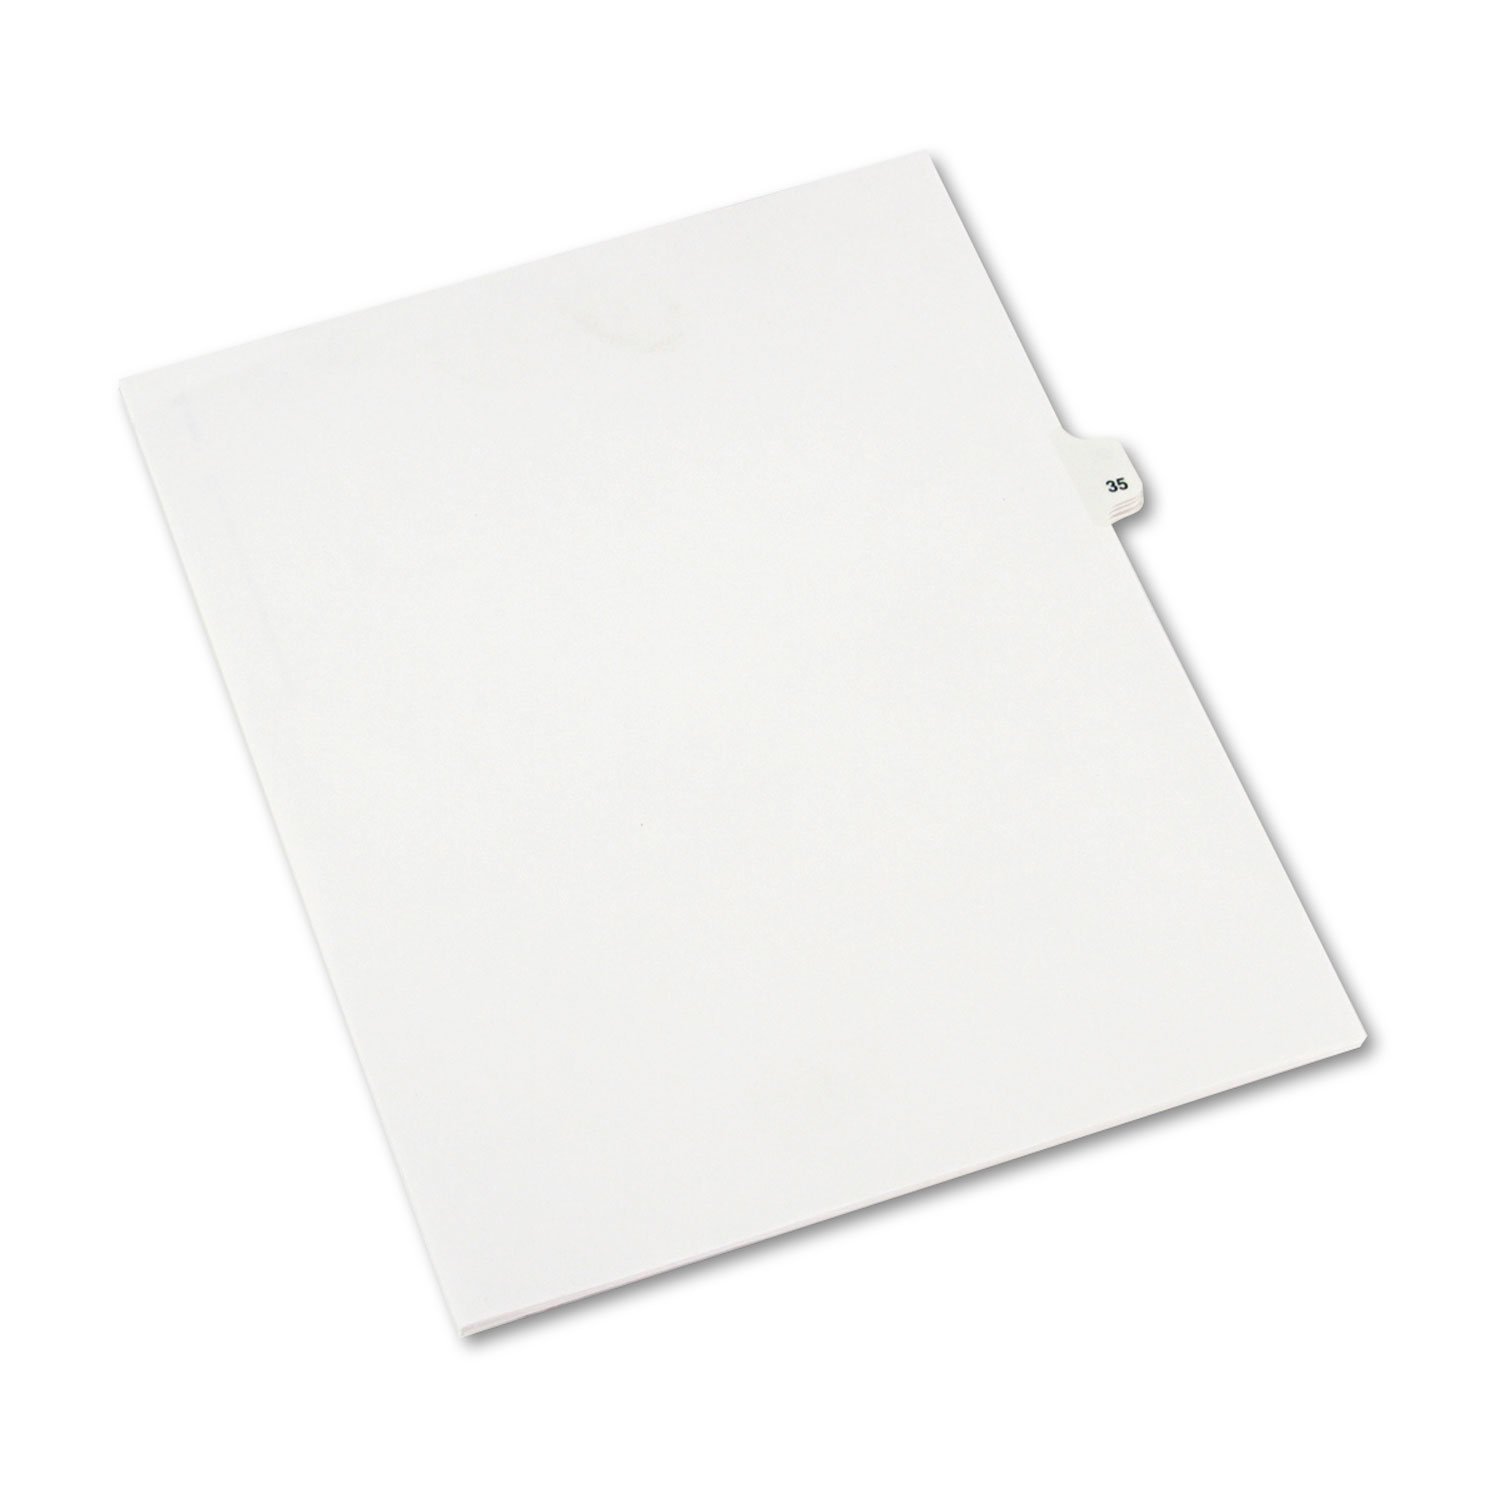 Avery-Style Legal Exhibit Side Tab Divider, Title: 35, Letter, White, 25/Pack